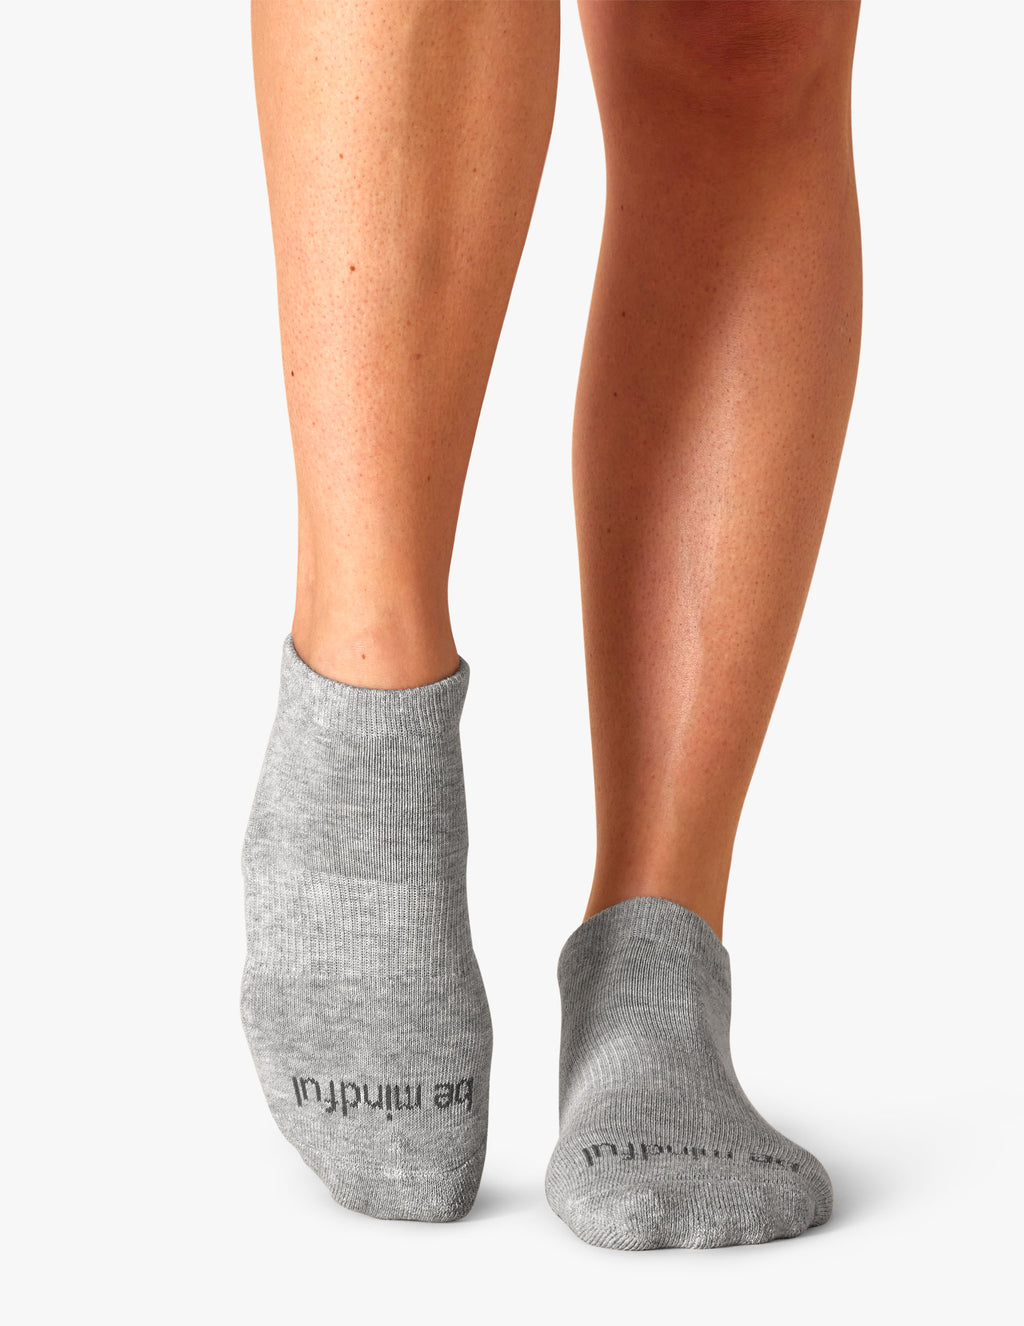 Sticky Be Mindful Grip Socks Featured Image